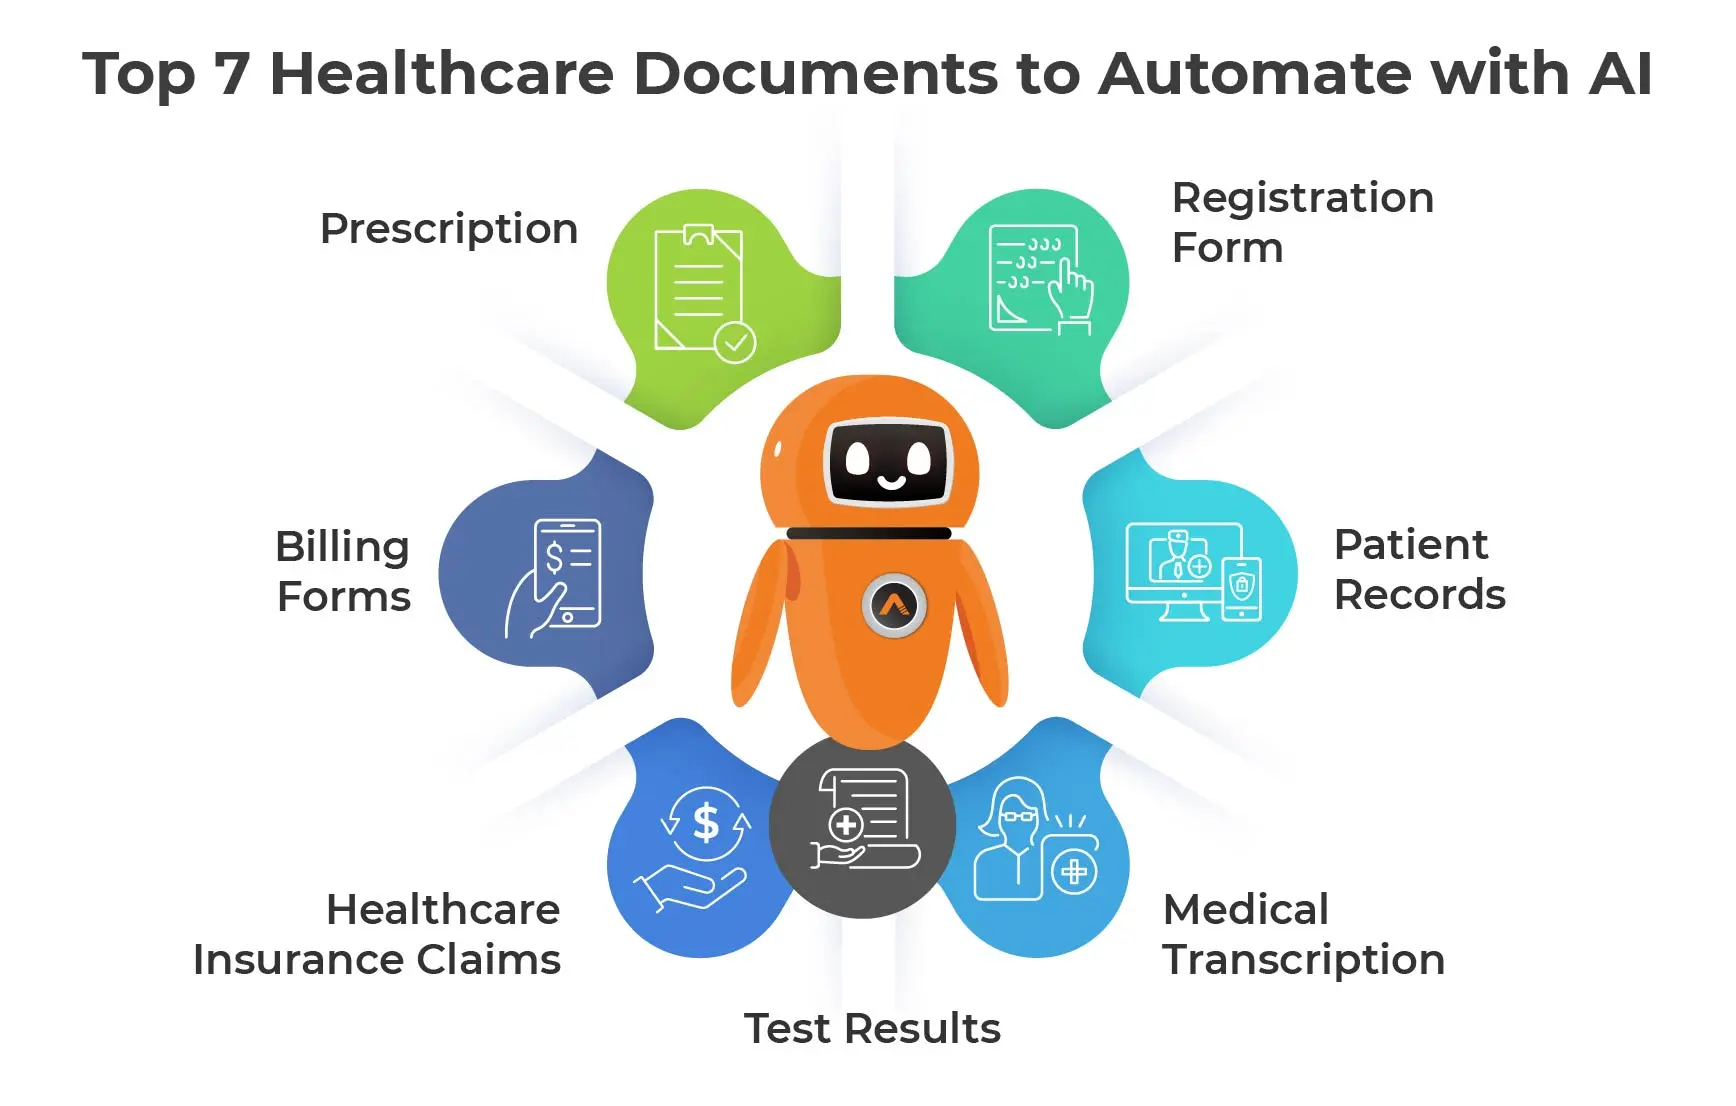 Top 7 Healthcare Documents to Automate with AI